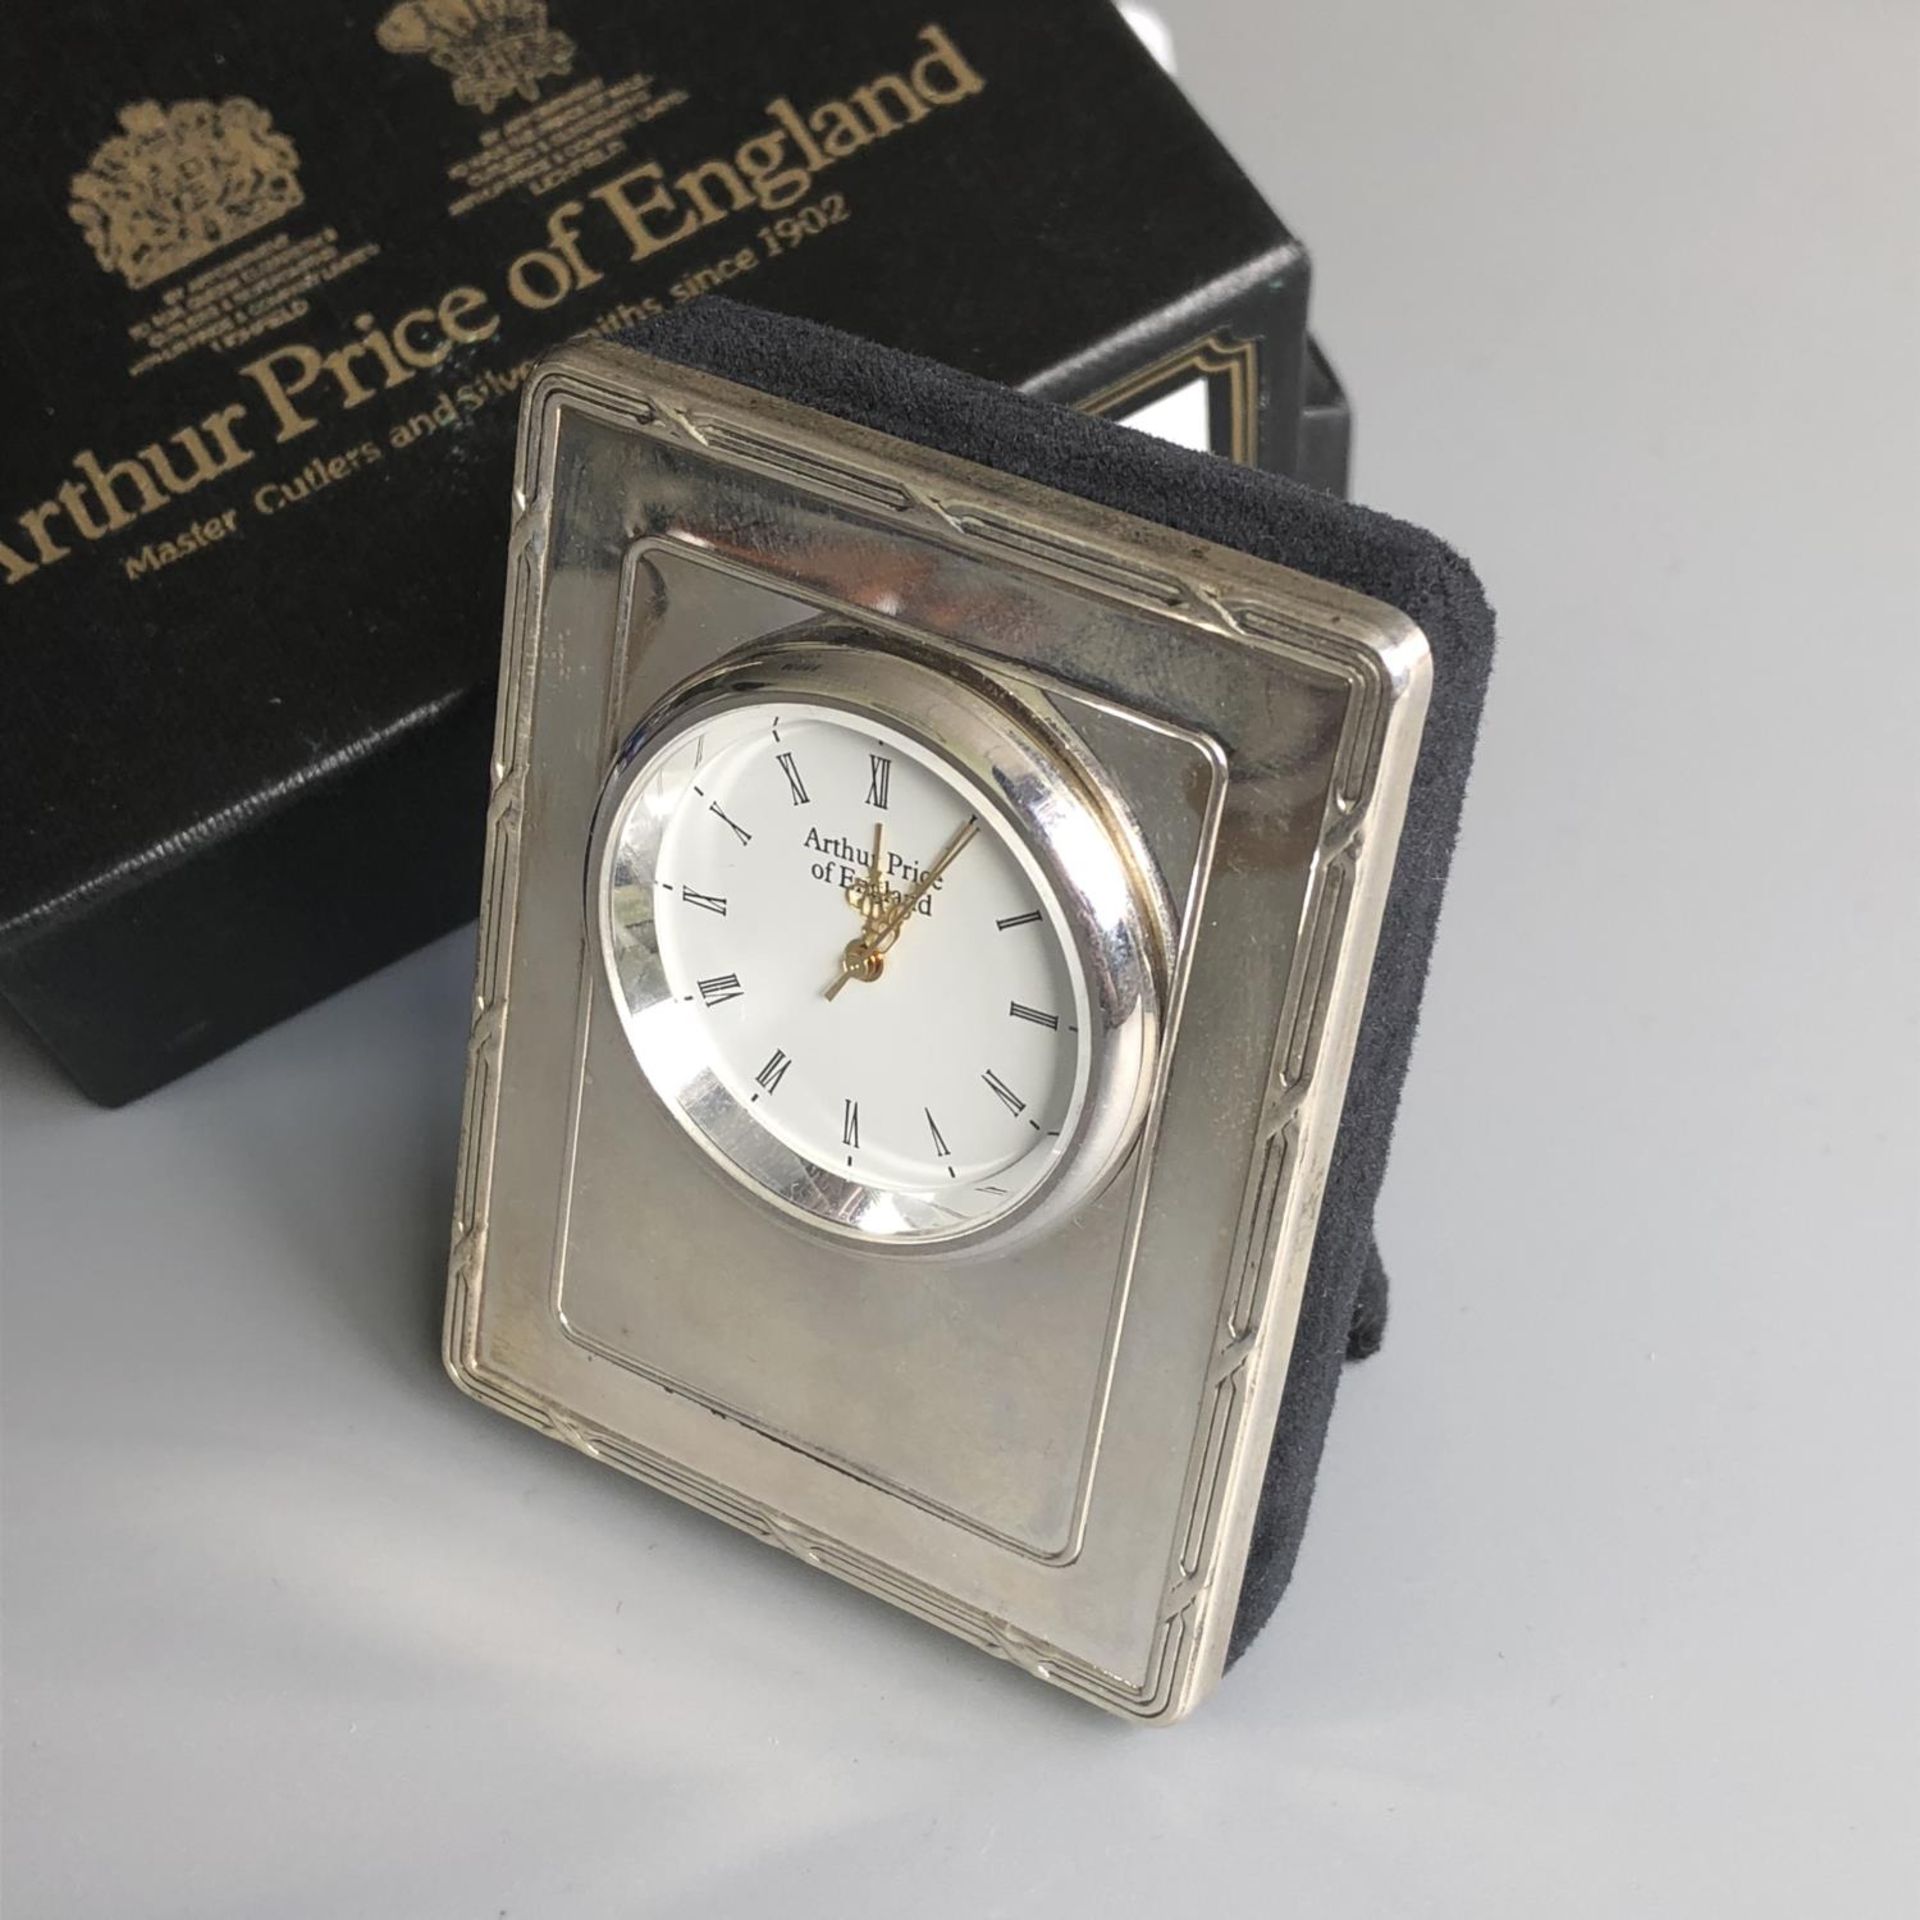 A silver clock by Arthur Price, together with original box - hallmarked London